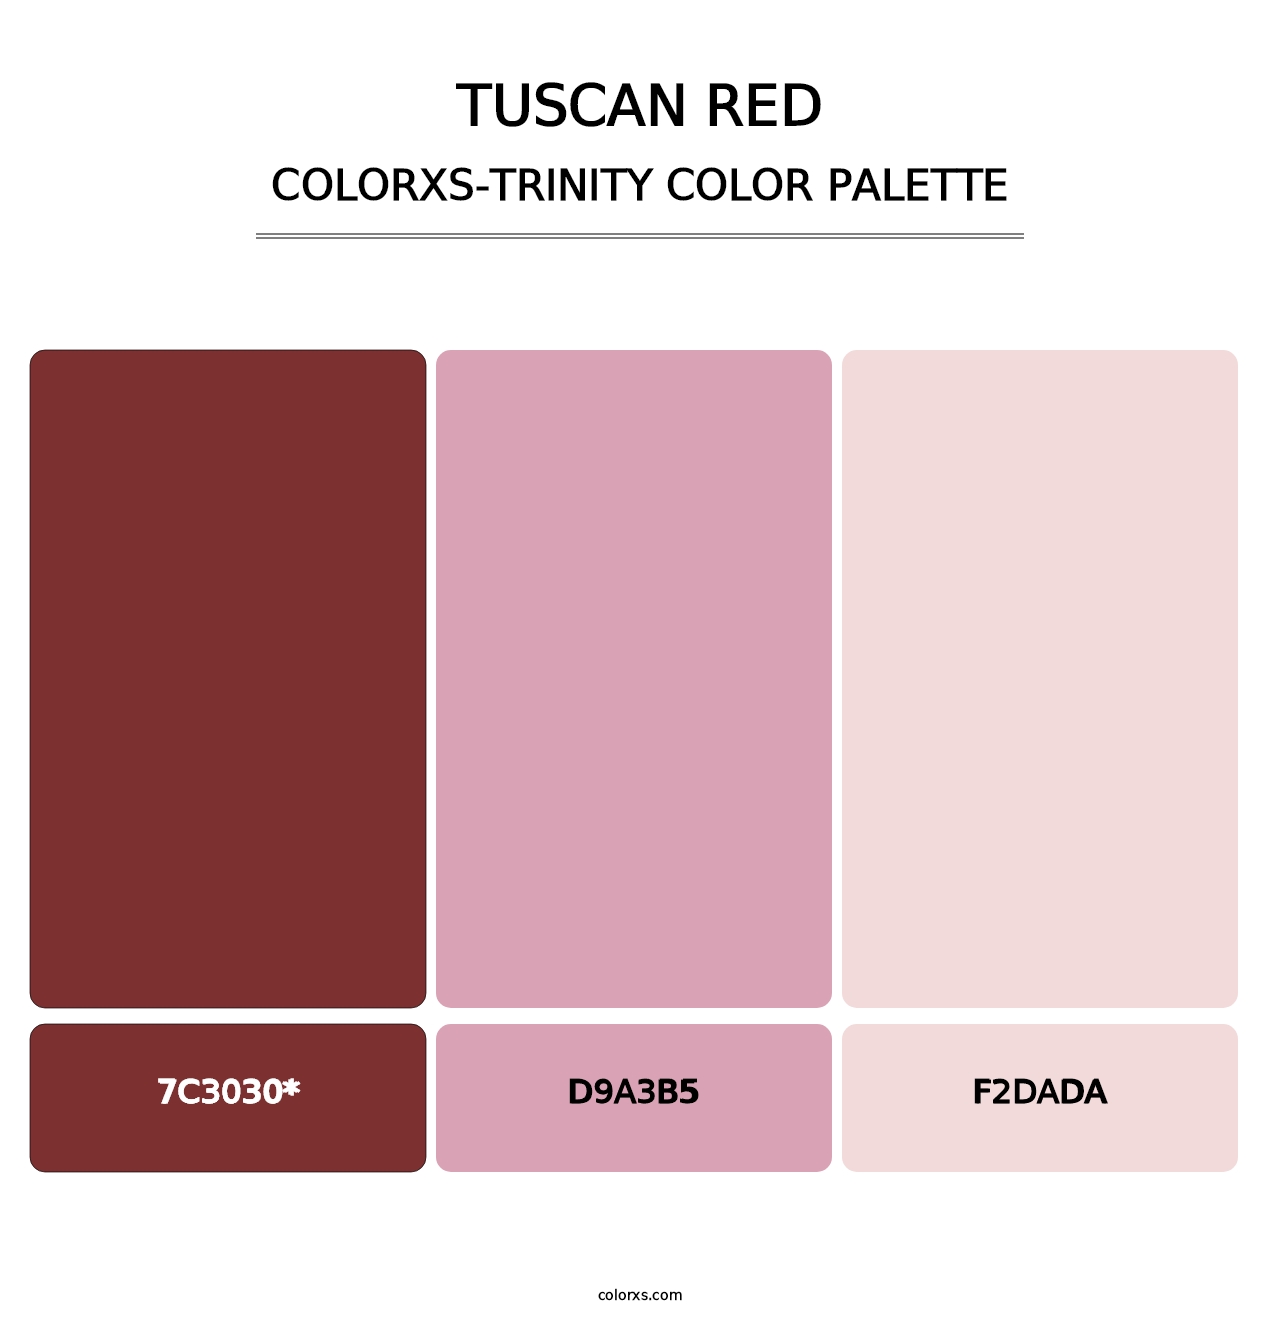 Tuscan Red - Colorxs Trinity Palette